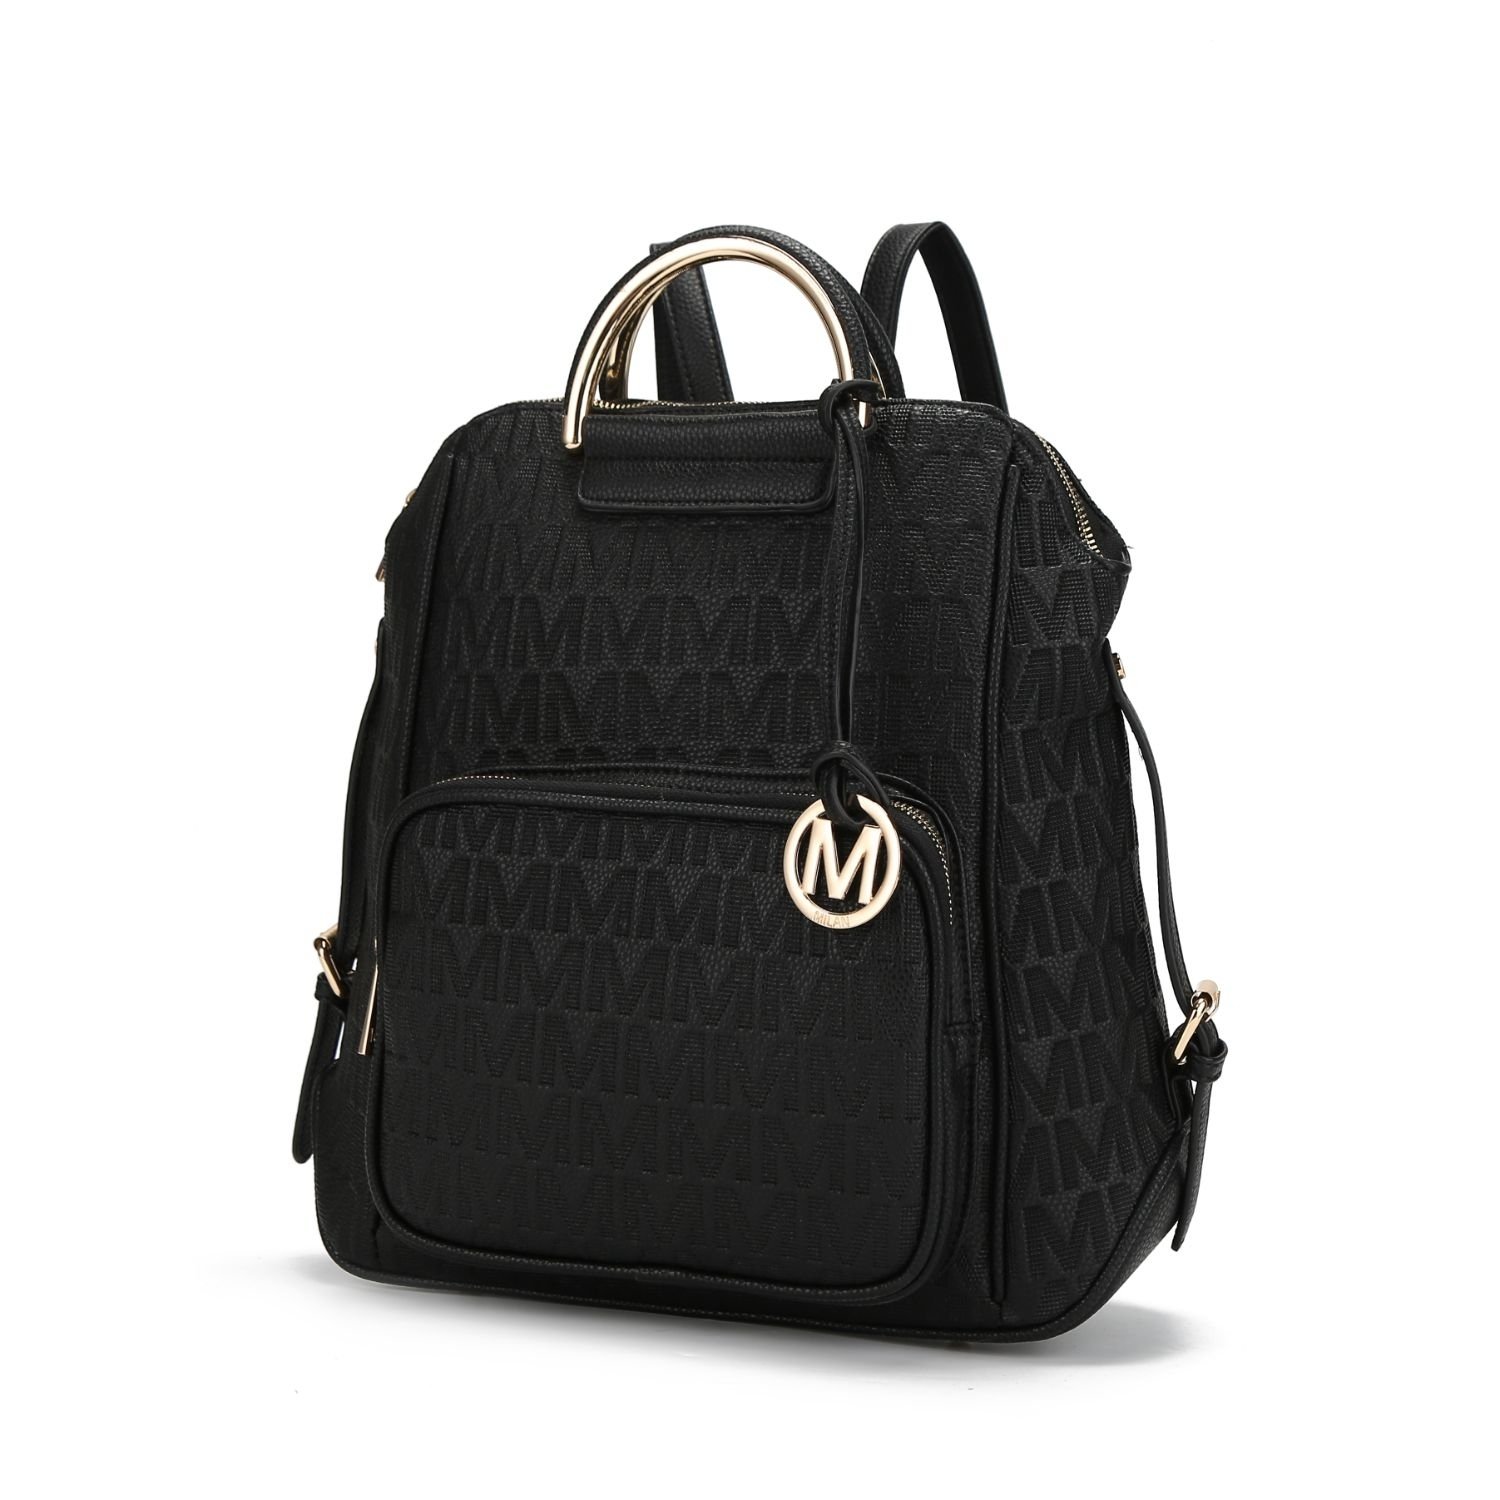 MKF Collection Torra Milan .M. Signature Trendy Backpack By Mia K. - Black